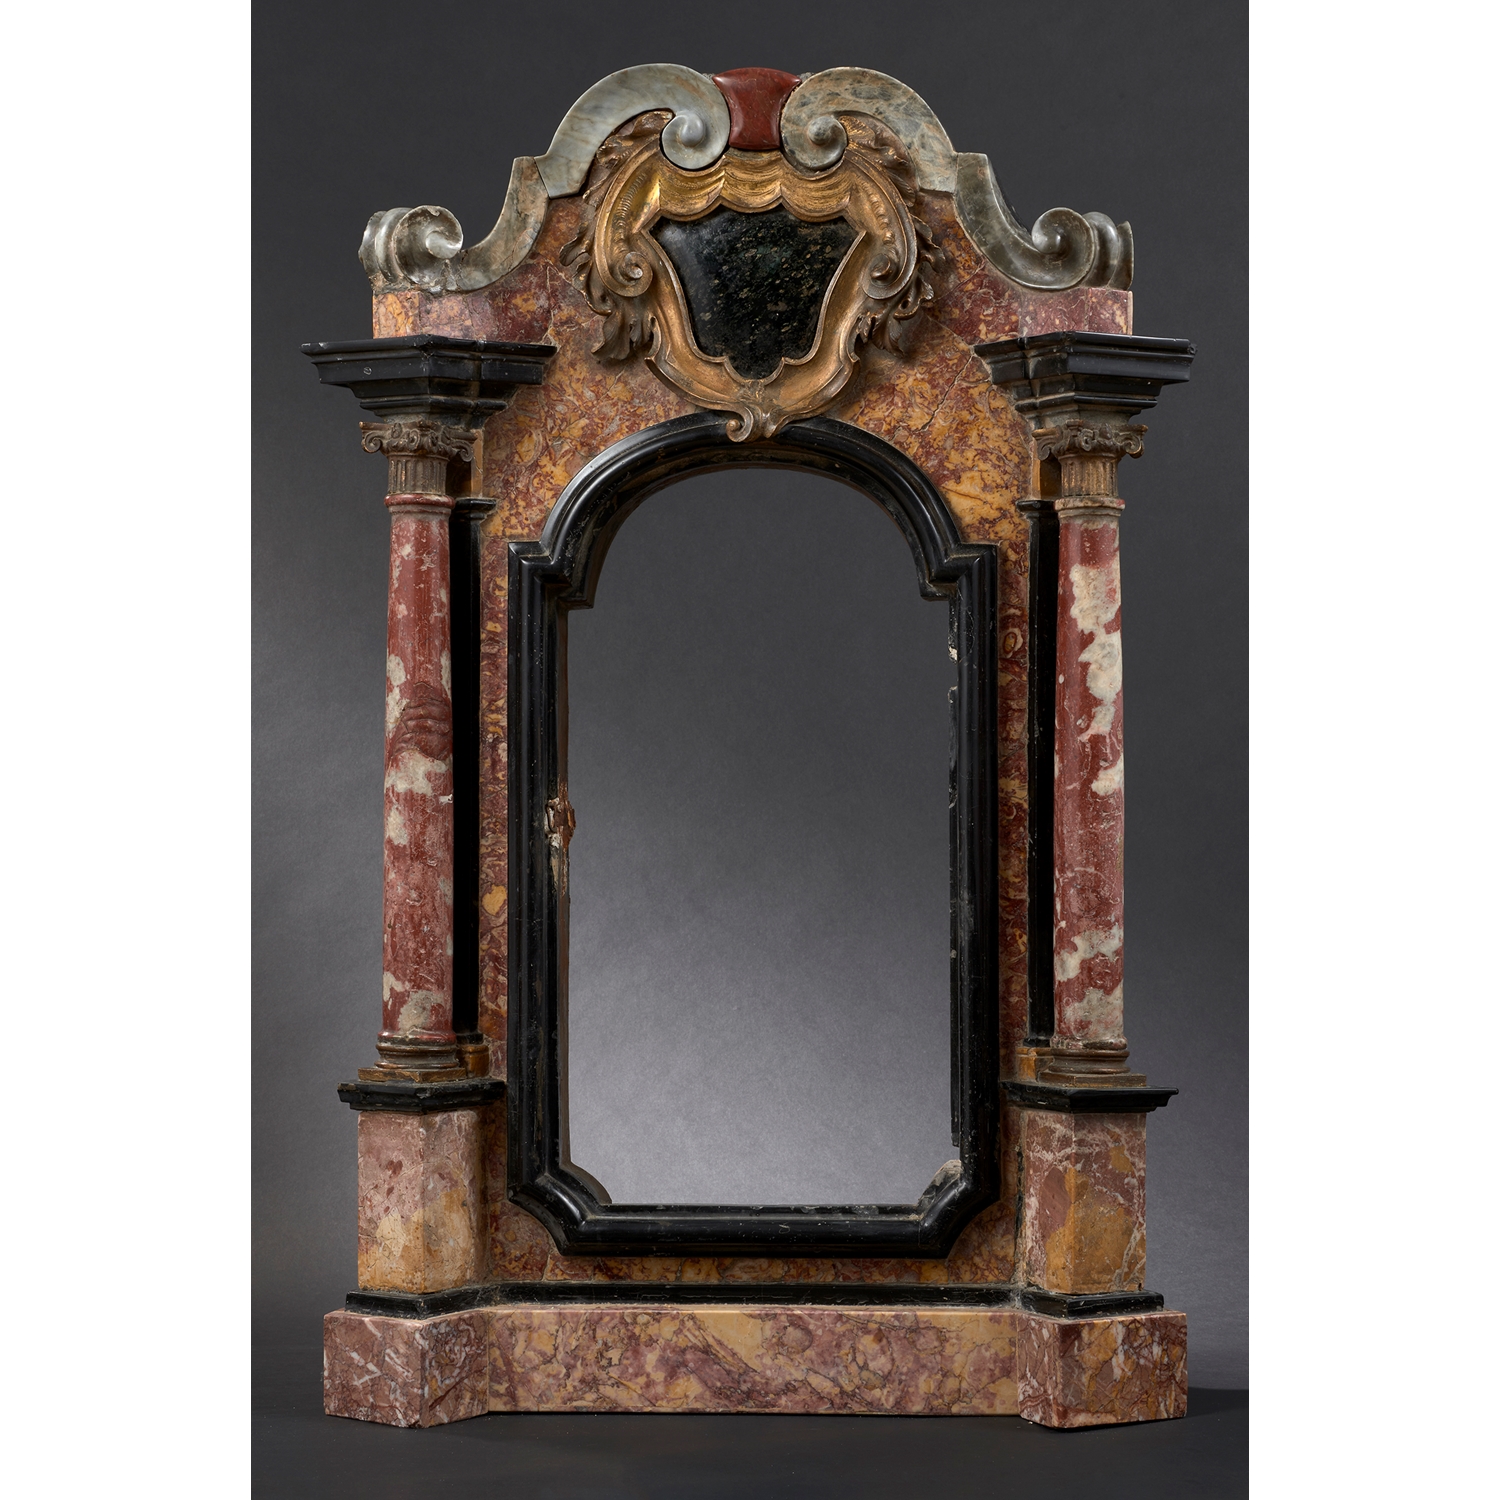 RARE BAROQUE TABERNACLE WITH BELGIUM BLACK MARBLE ORNATED WITH MARQUETRY OF MARBLES AND GILT BRONZE   ITALY 17th CENTURY